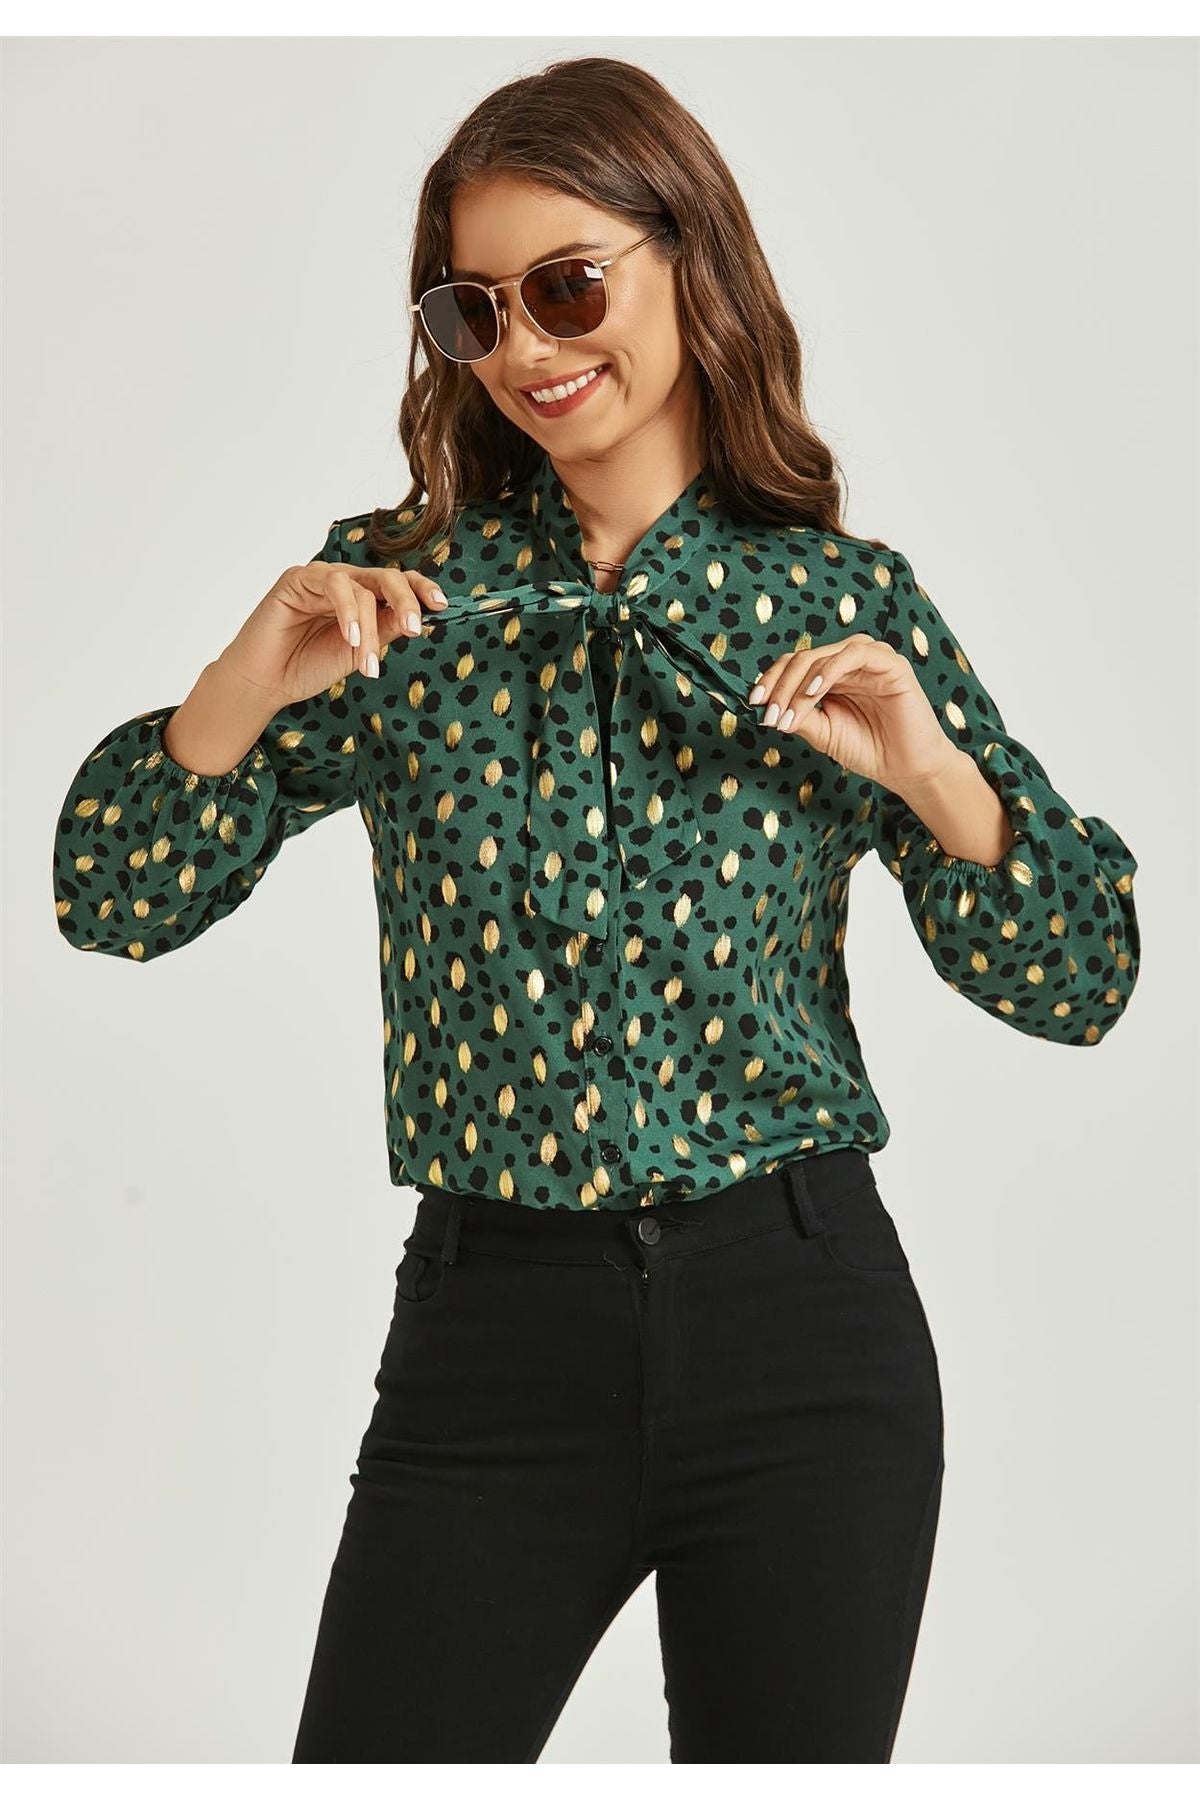 Gold Foil Leopard Print Pussybow Blouse Top In Green FS494